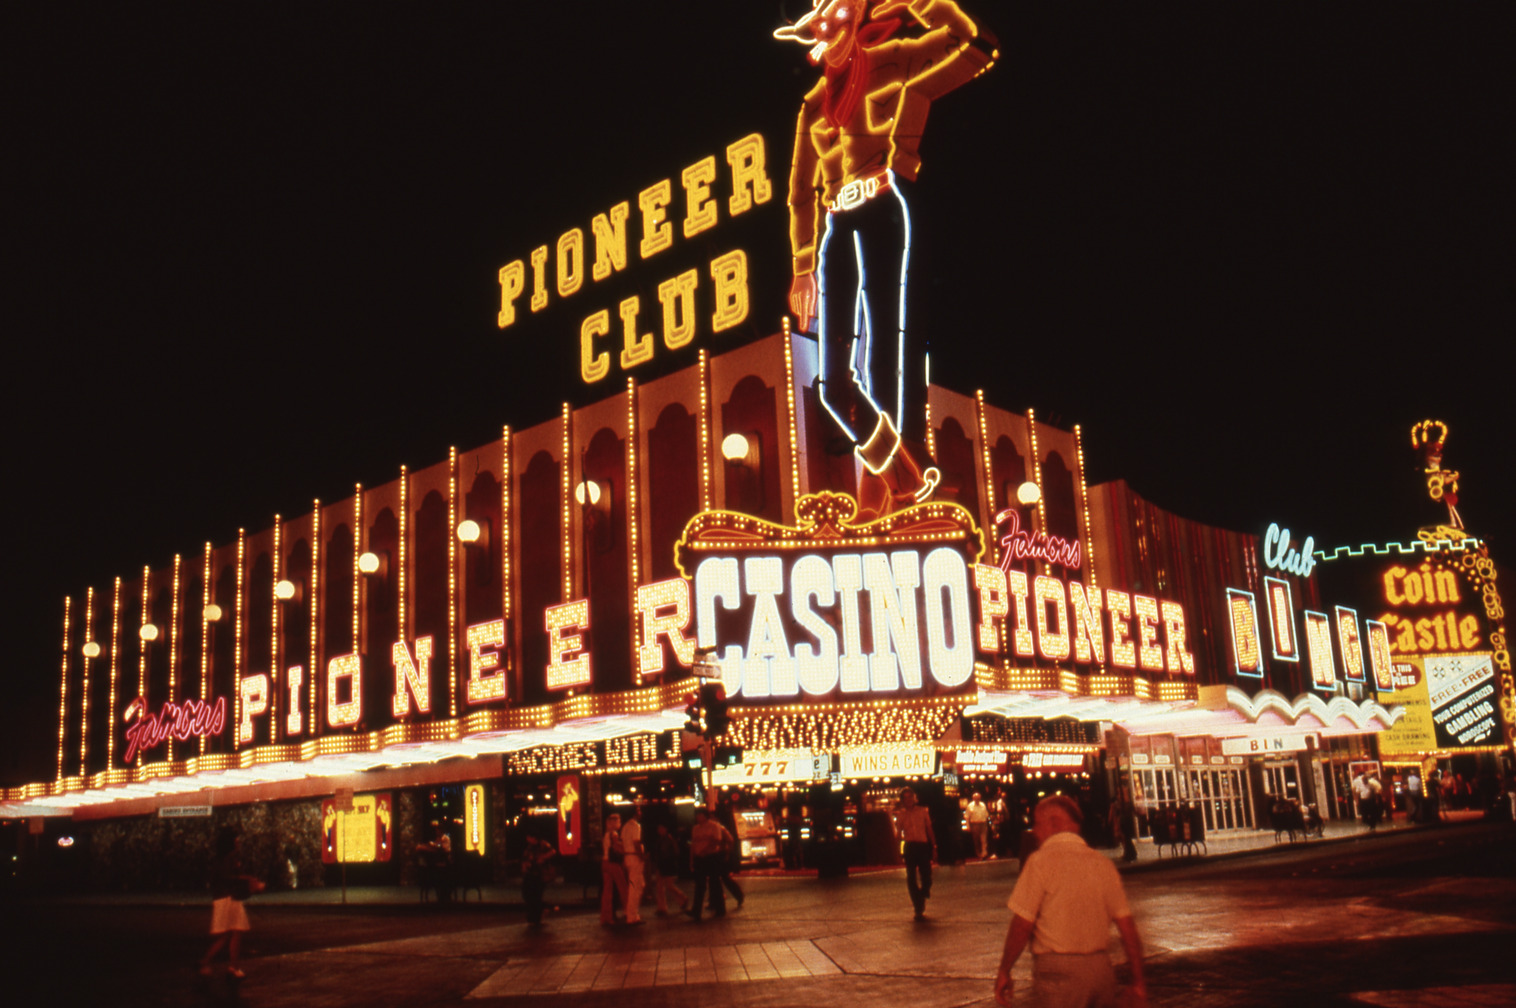 Pioneer Club featuring Vegas Vic flag mounted, lettering, and wall signs, Las Vegas, Nevada: photographic print